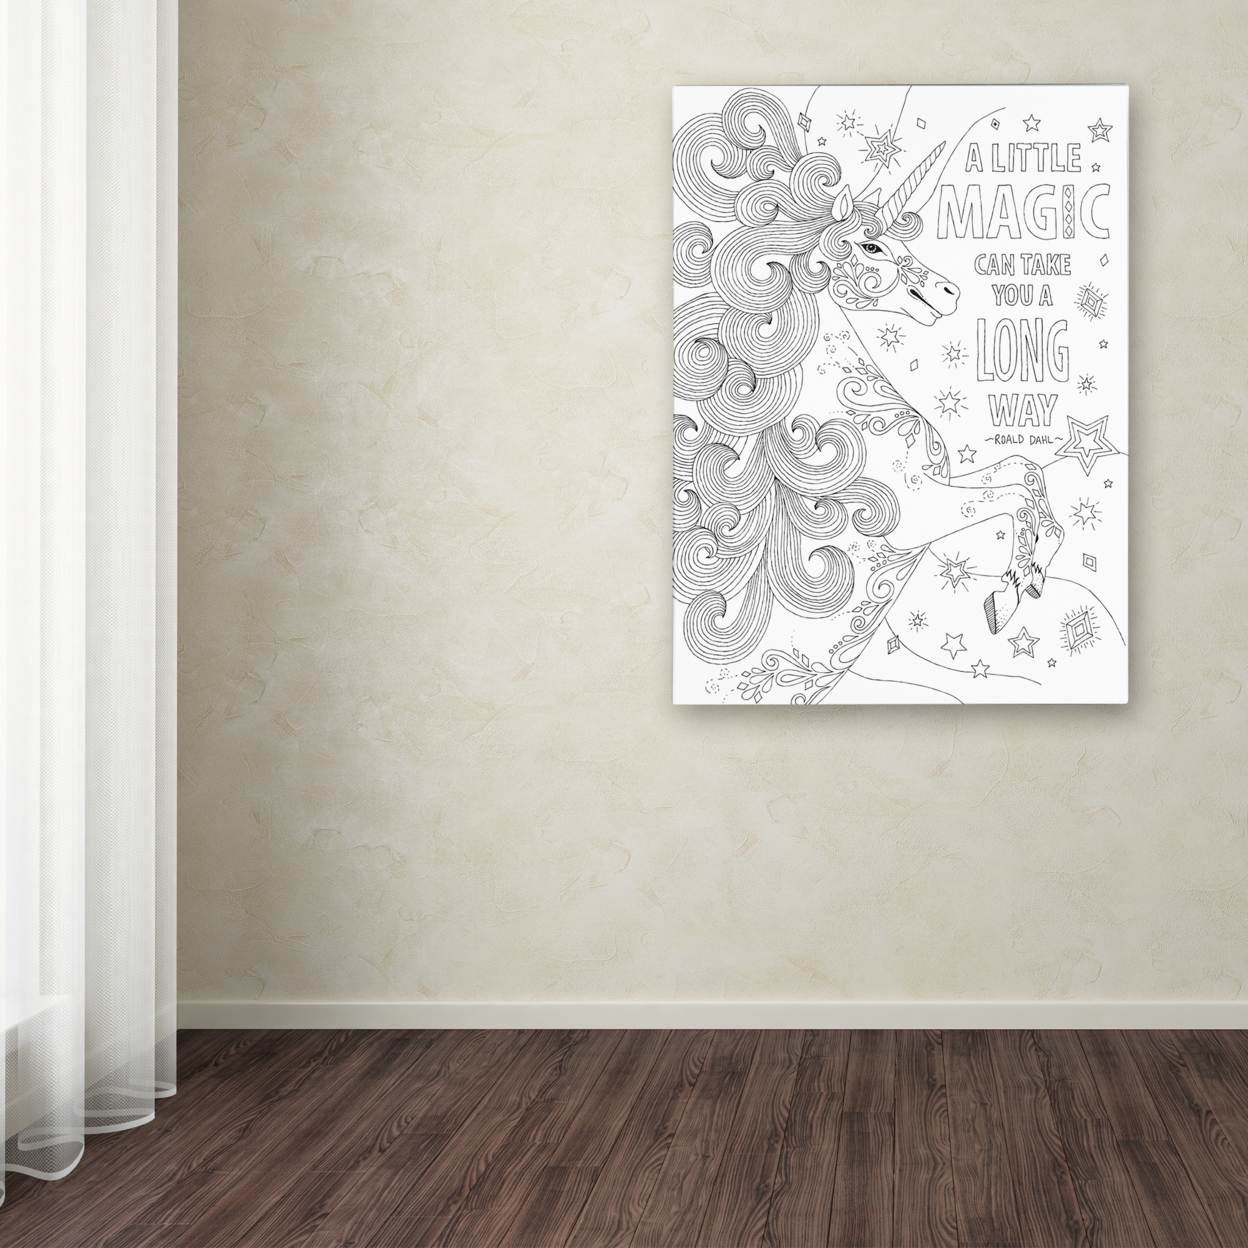 Hello Angel 'Inspirational Quotes 3' Canvas Wall Art 35 X 47 Inches